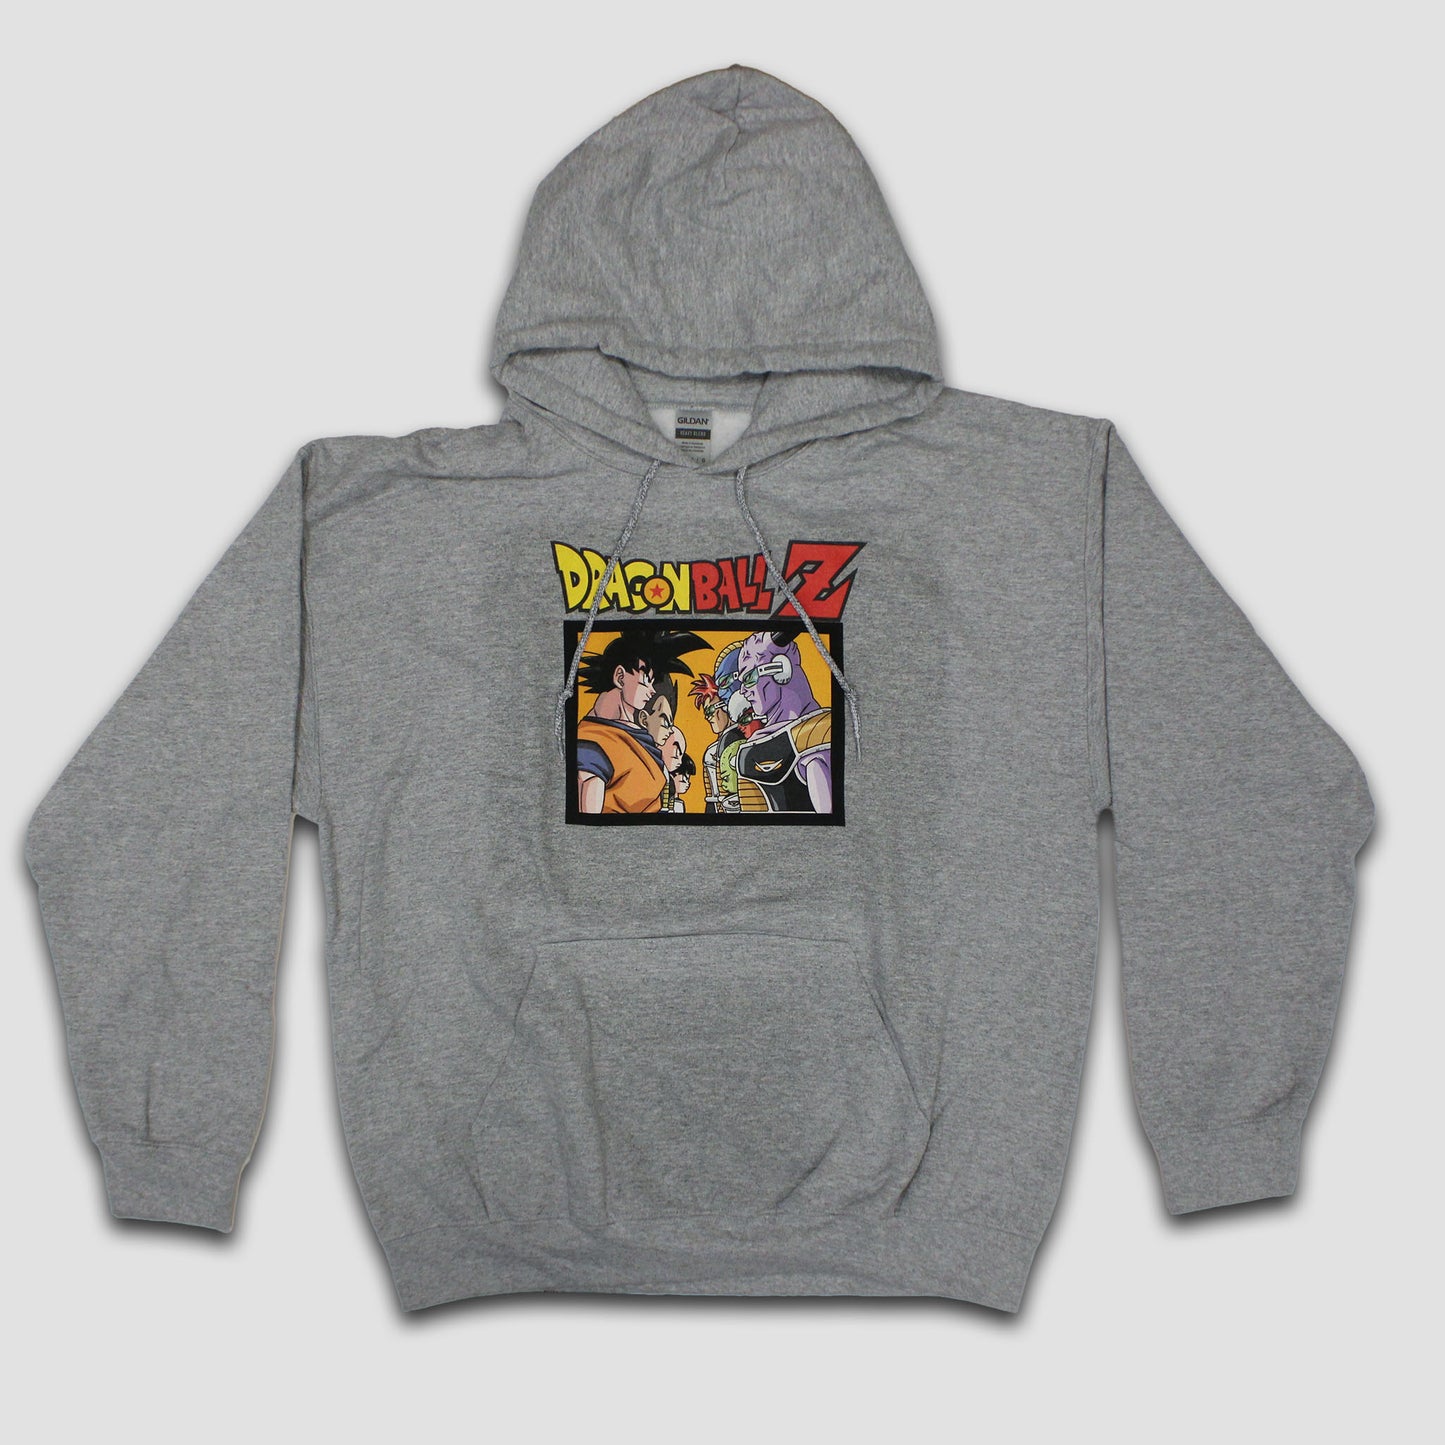 Heroes and Villains (Dragon Ball Z) Pullover Hoodie Sweatshirt